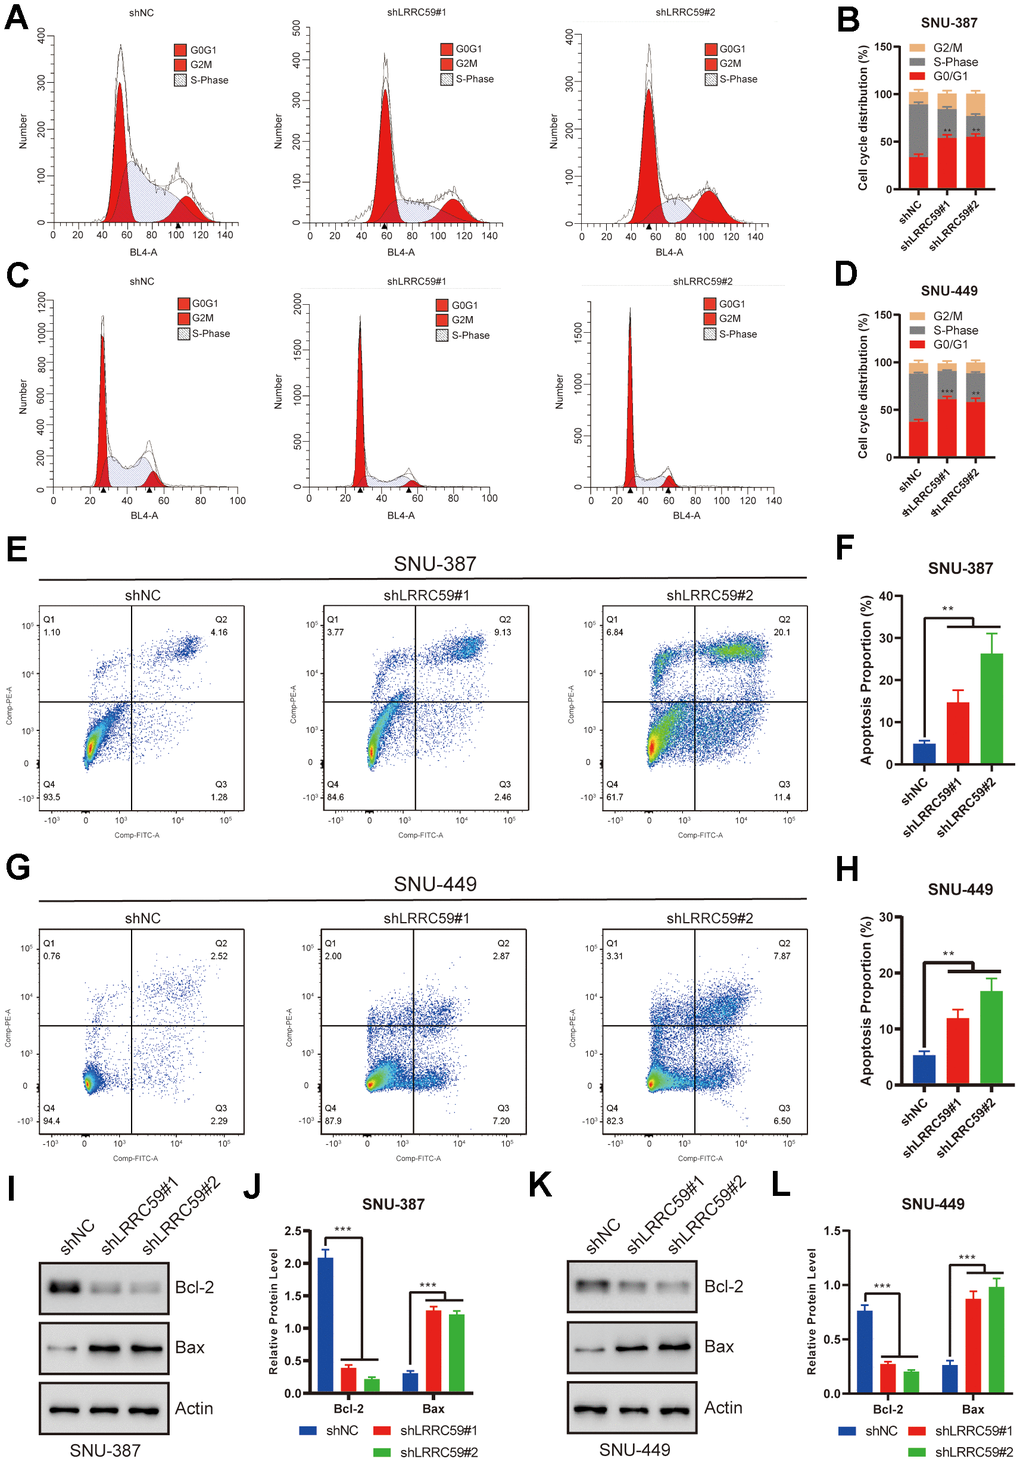 LRRC59 knockdown induced cell cycle arrest and apoptosis in HCC cells. (A–D) Flow cytometry was used to detect the role of LRRC59 on cell cycle arrest. (E–H) Flow cytometry was used to detect the role of LRRC59 on cell apoptosis. (I–L) Western blot showed the expression of apoptosis-related markers in SNU-387 and SNU-449.